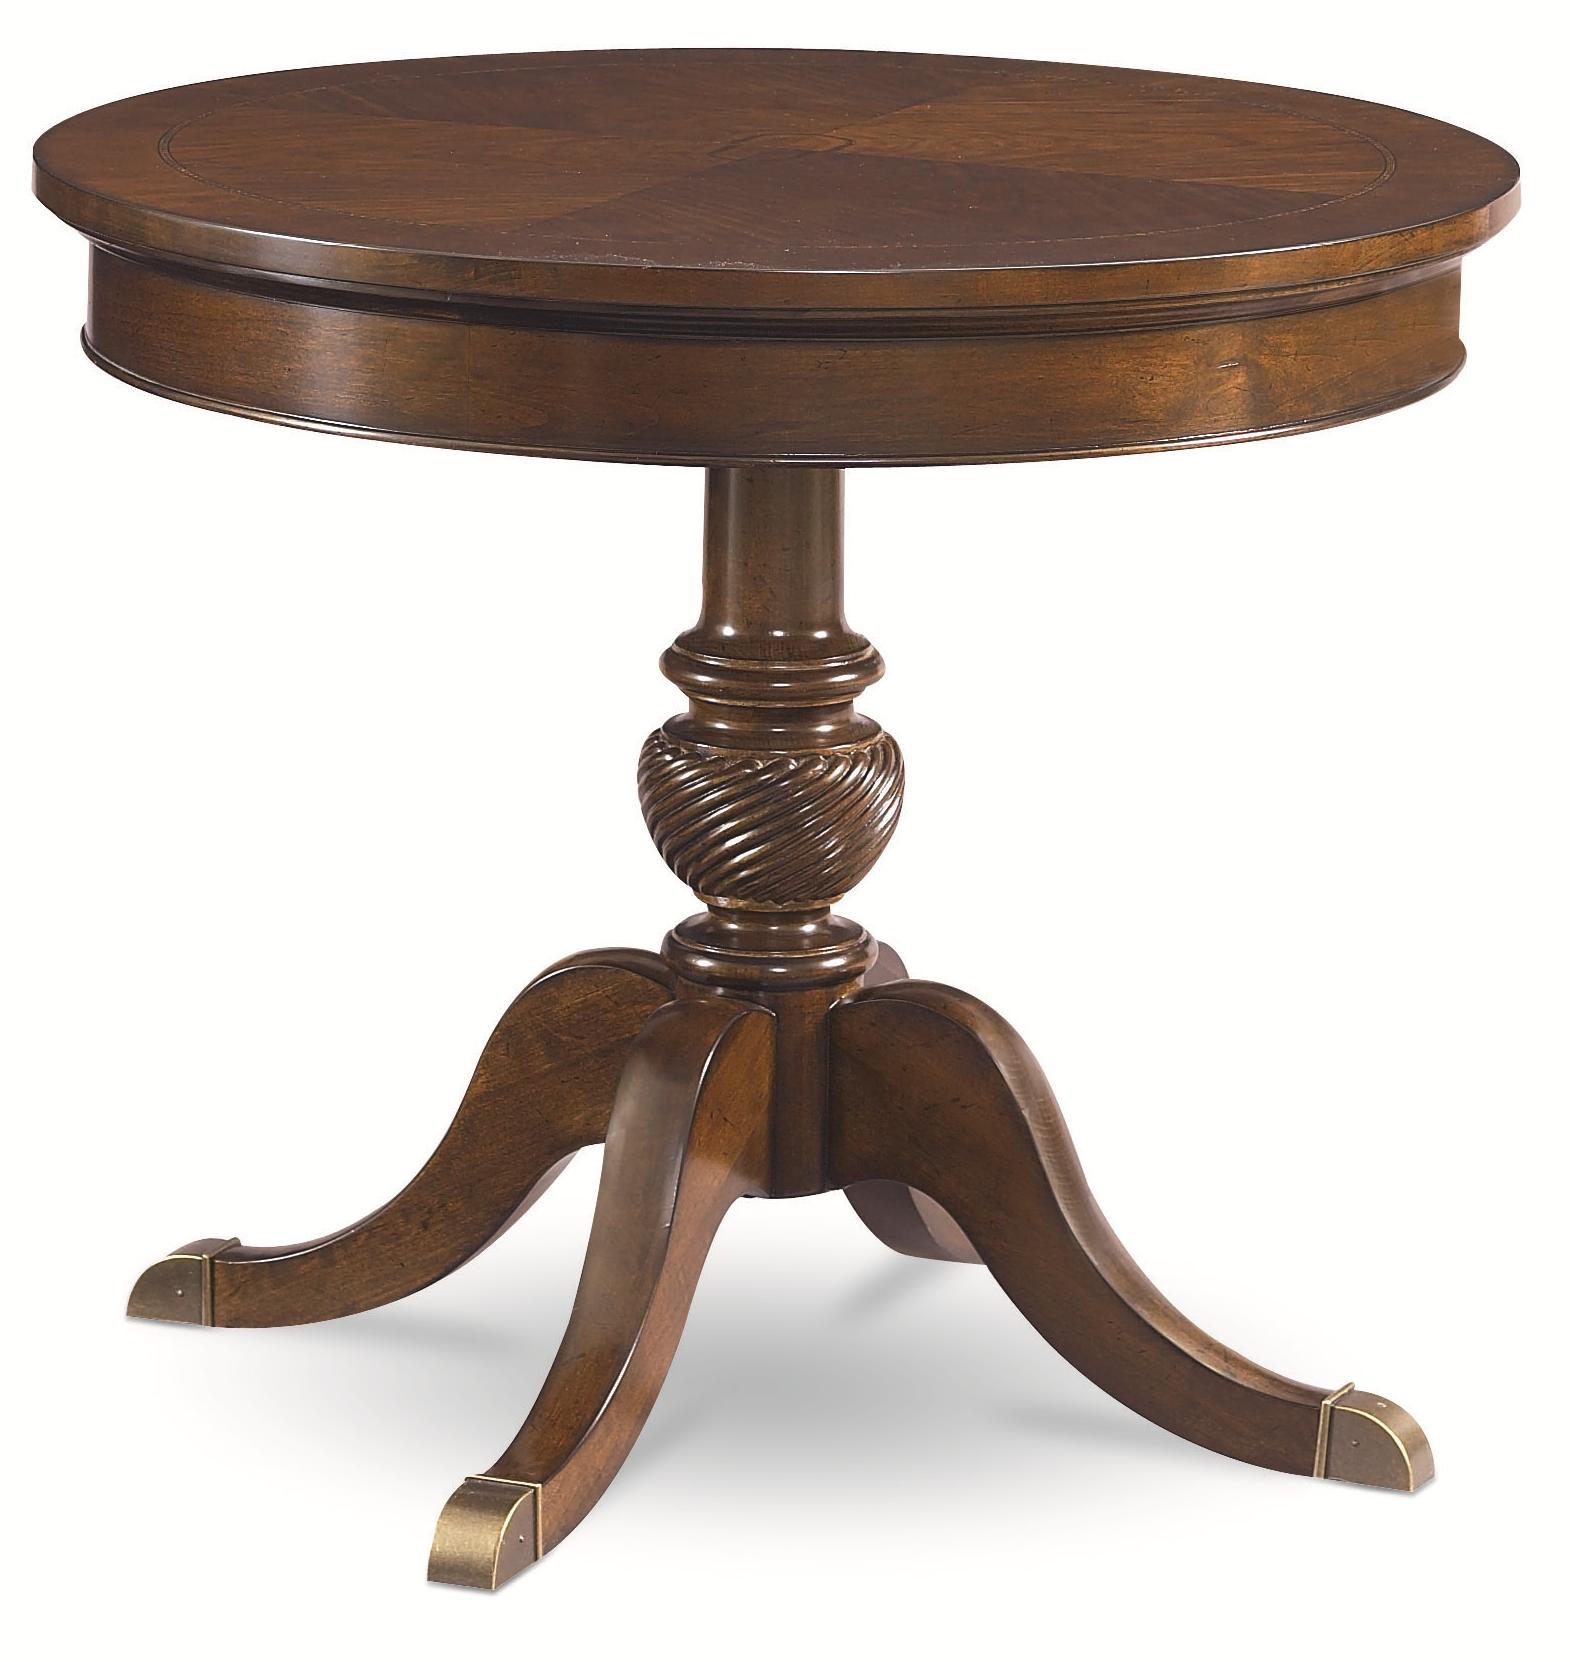 beautiful inch high accent tables home design ideas oneletter fascinating tall antique wooden pedestal wood diy paula white round rene small side deen black distressed large